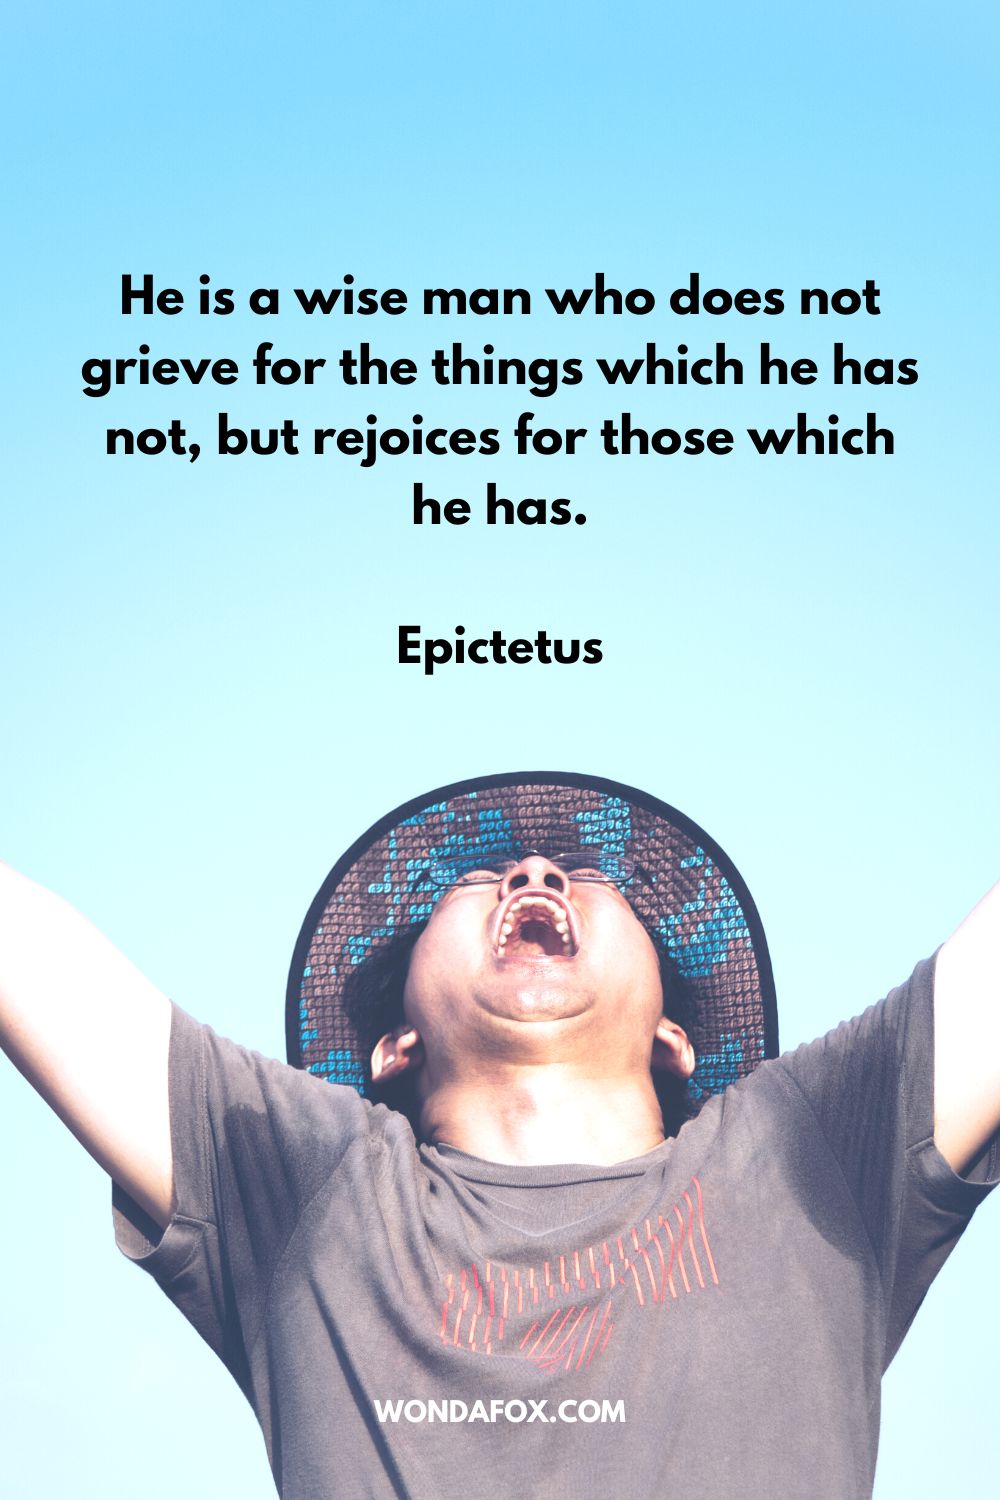 He is a wise man who does not grieve for the things which he has not, but rejoices for those which he has. Epictetus